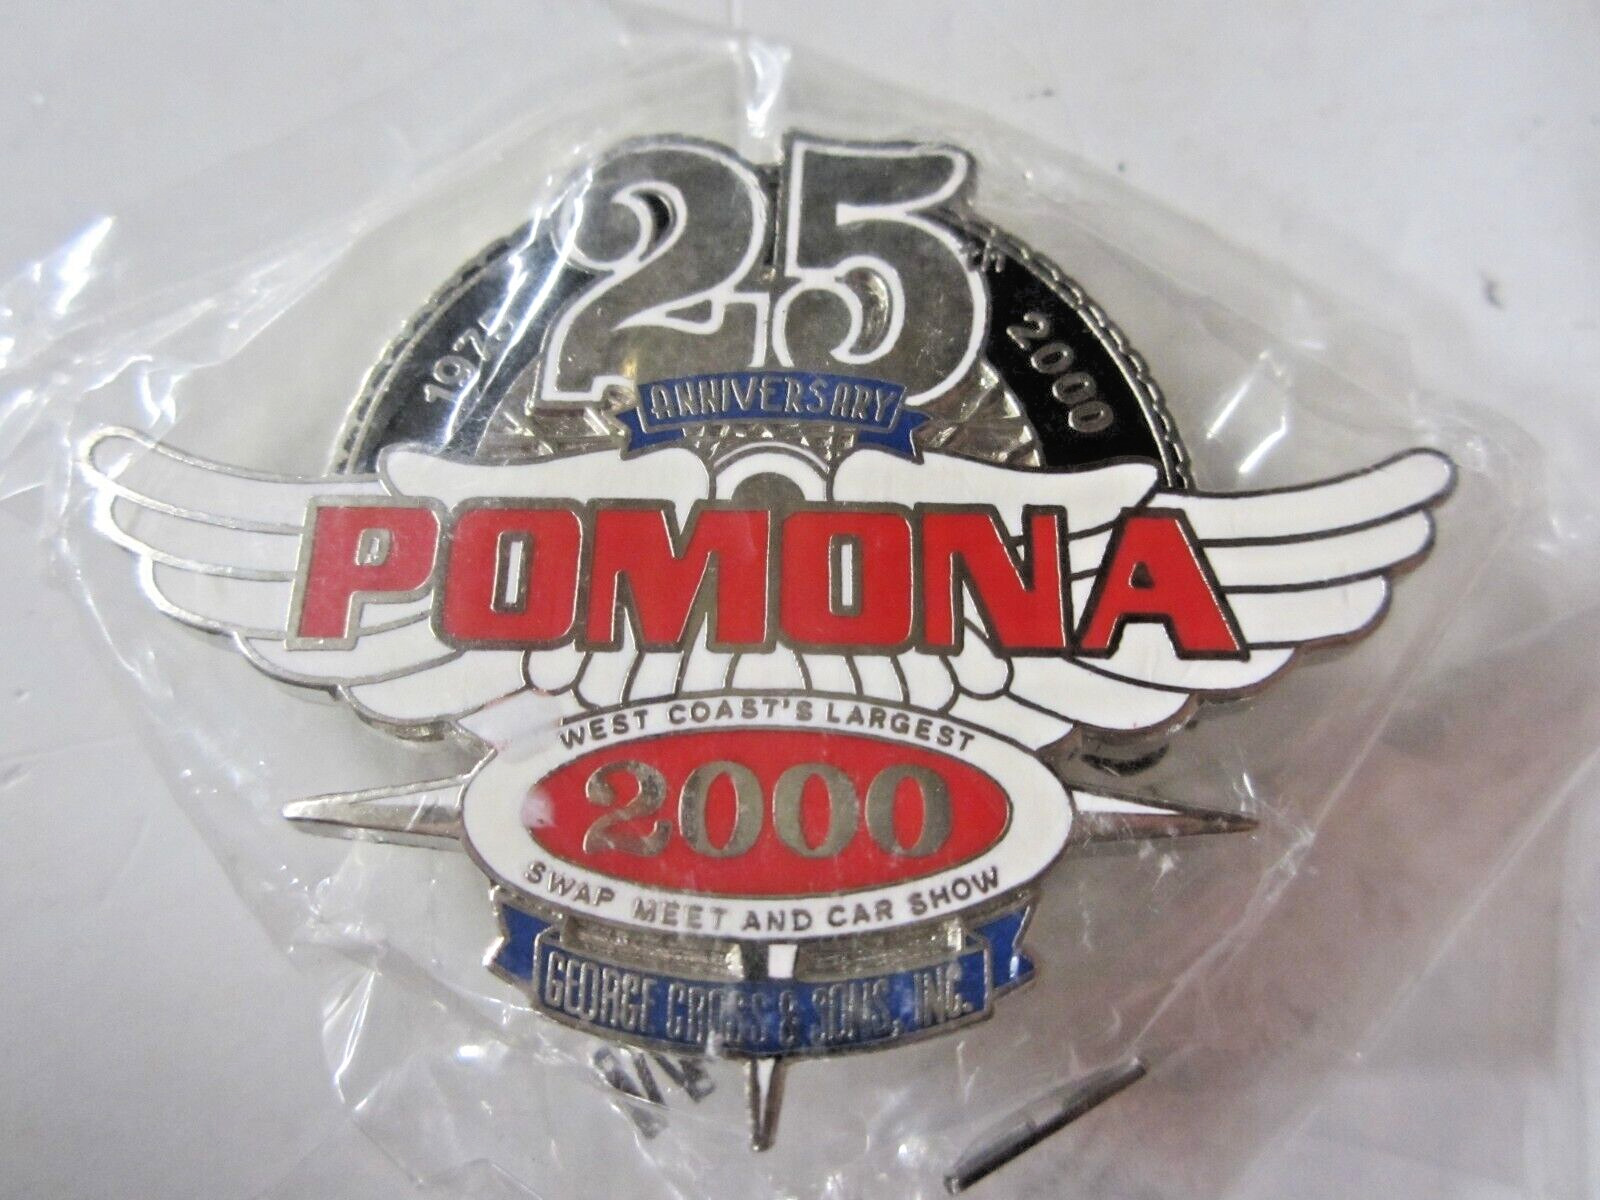 George Cross & Sons 25th Anniversary Pomona Swap Meet And Car Show Event Pin